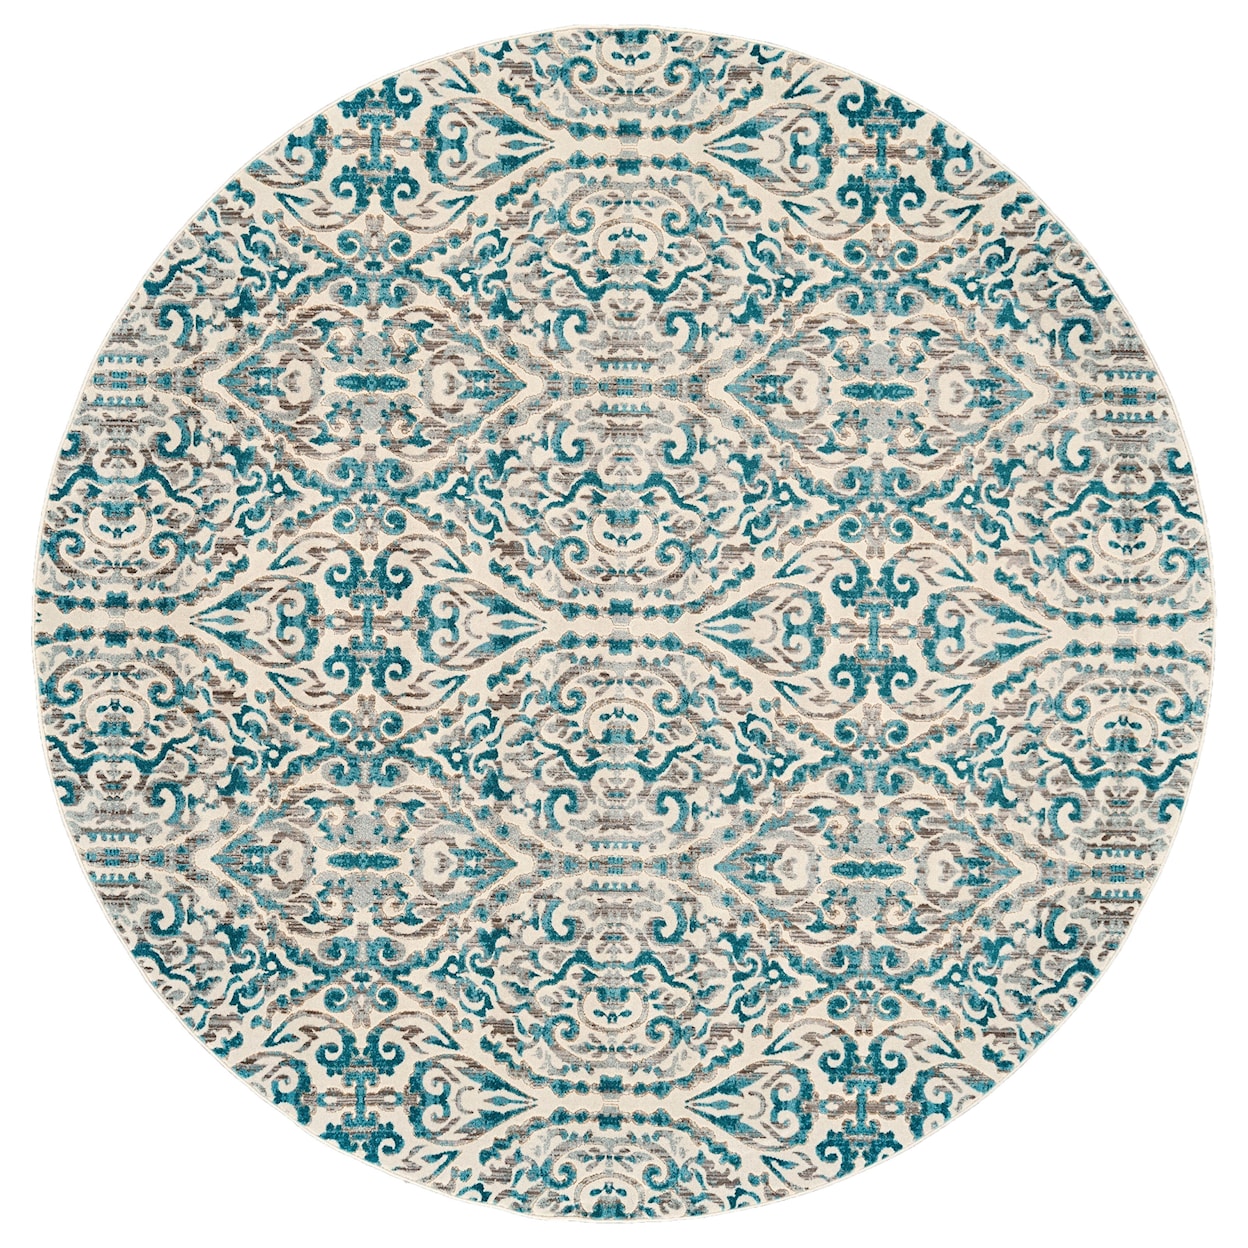 Feizy Rugs Keats Turquoise 10'-2" X 13'-9" Area Rug